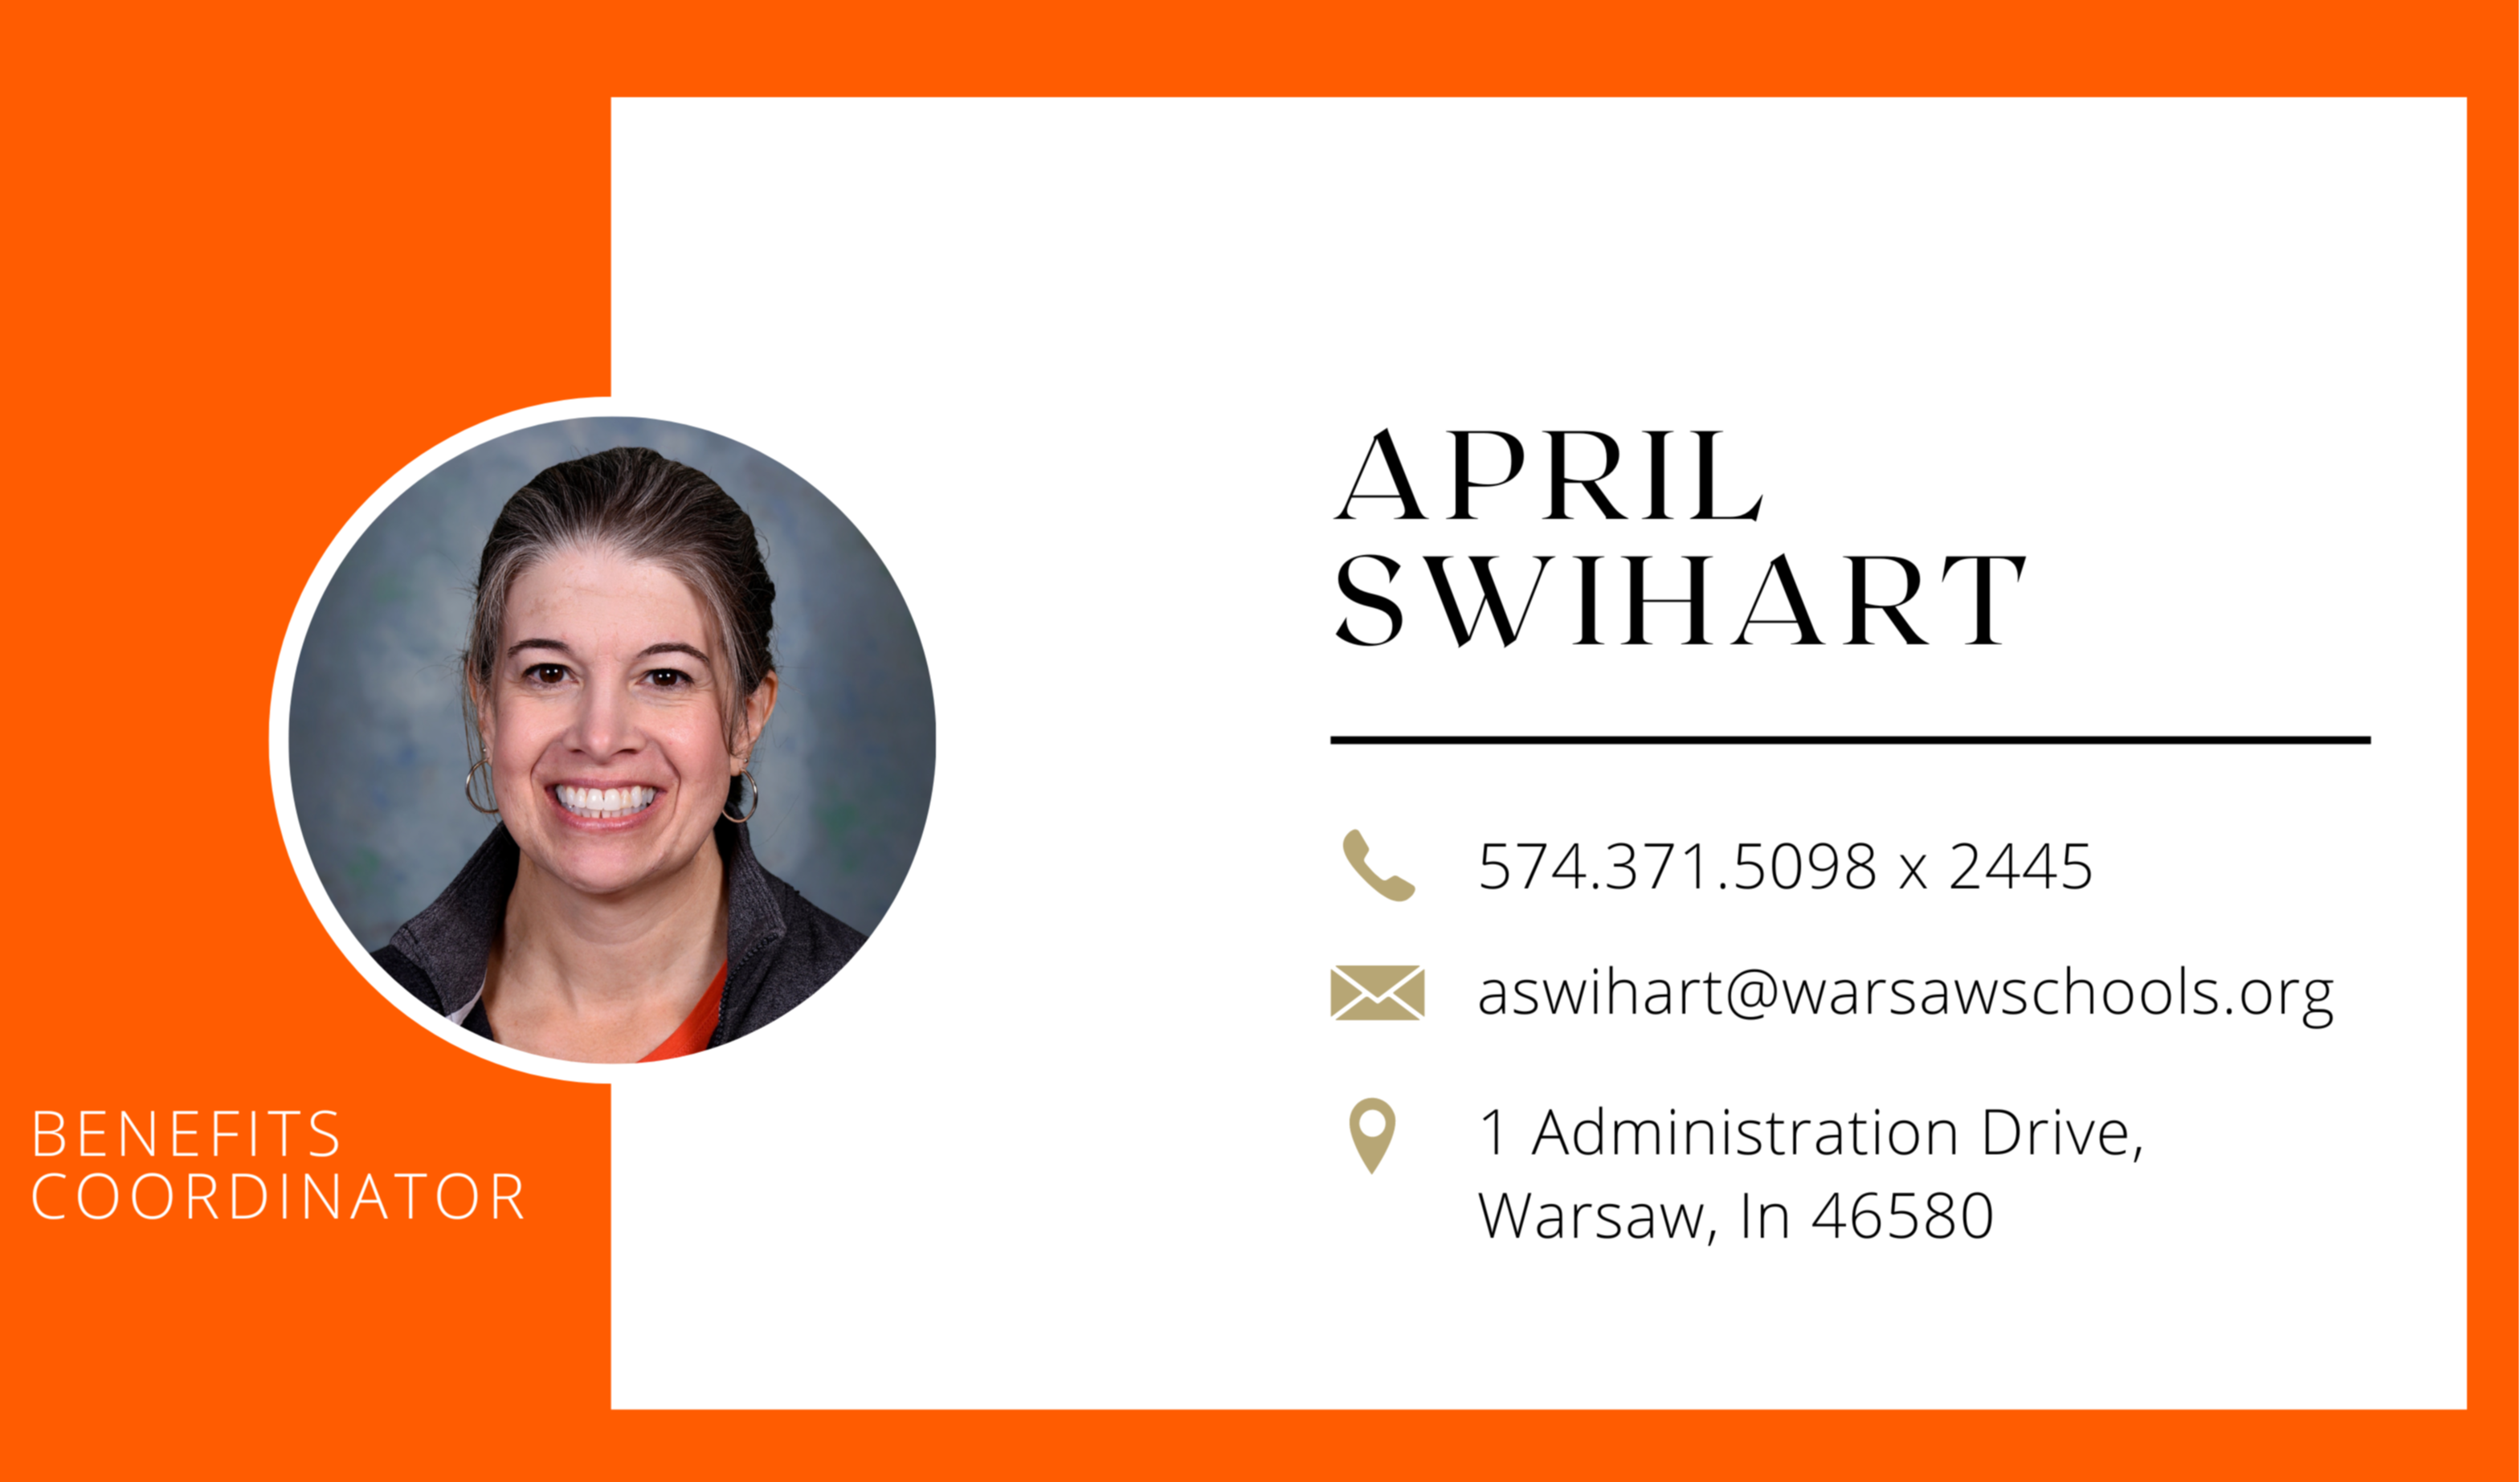 April Swihart. Photo of April smiling against orange and white background. Benefits Coordinator. 574.371.5098 x 2445. aswihart@warsawschools.org 1 Administration Drive, Warsaw, IN 46580